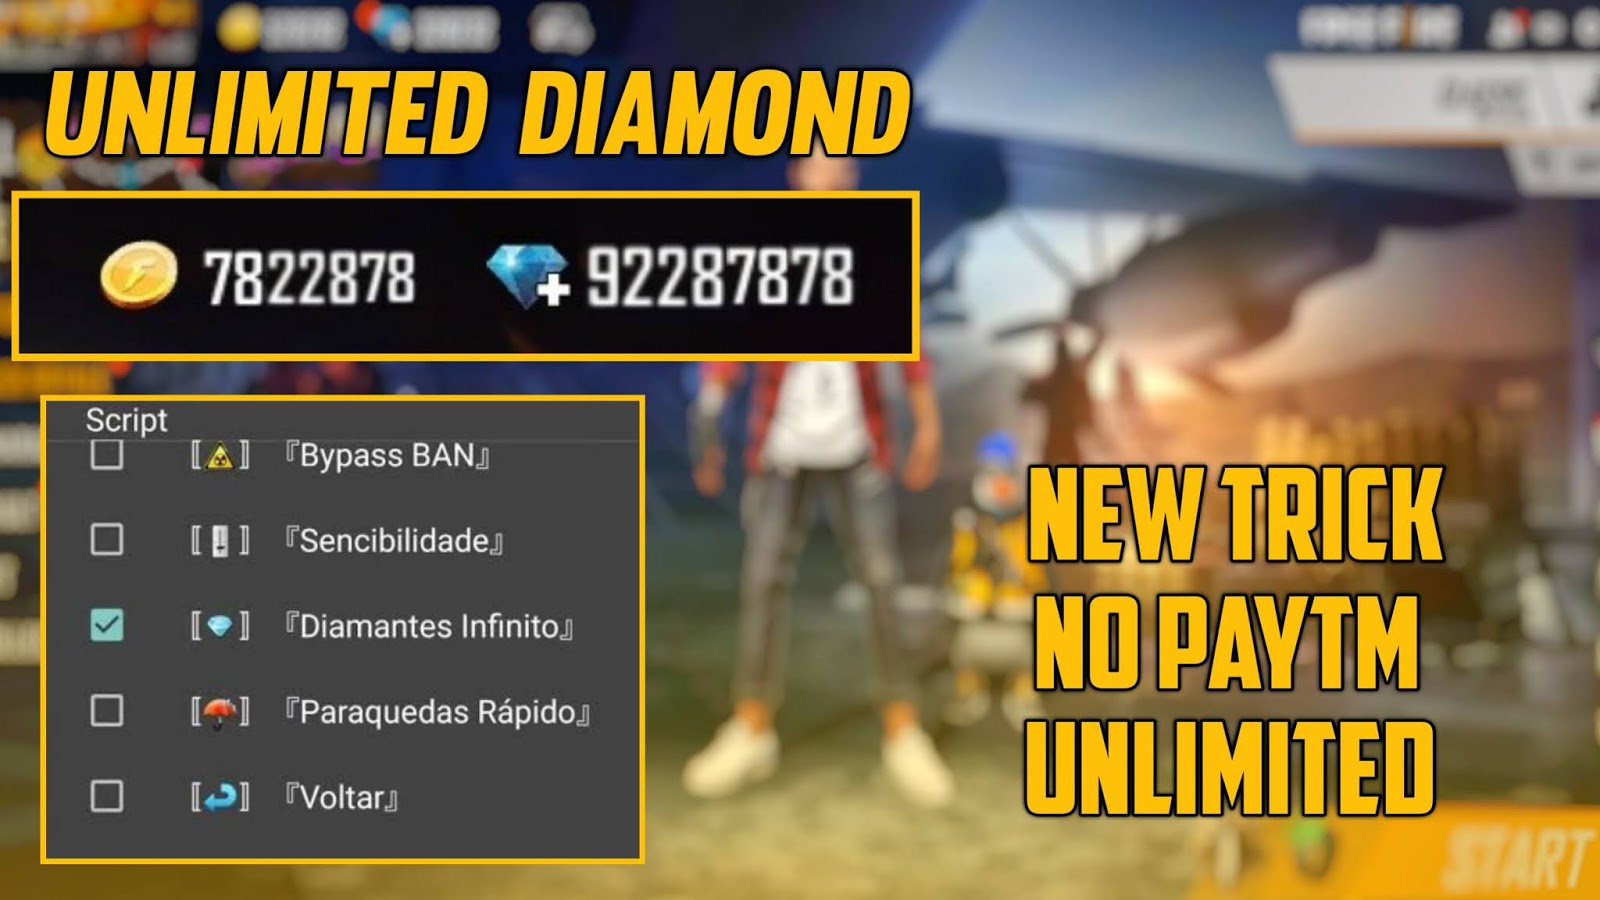 How to get unlimited Diamonds in free fire | 100% working ... - 1600 x 900 jpeg 182kB